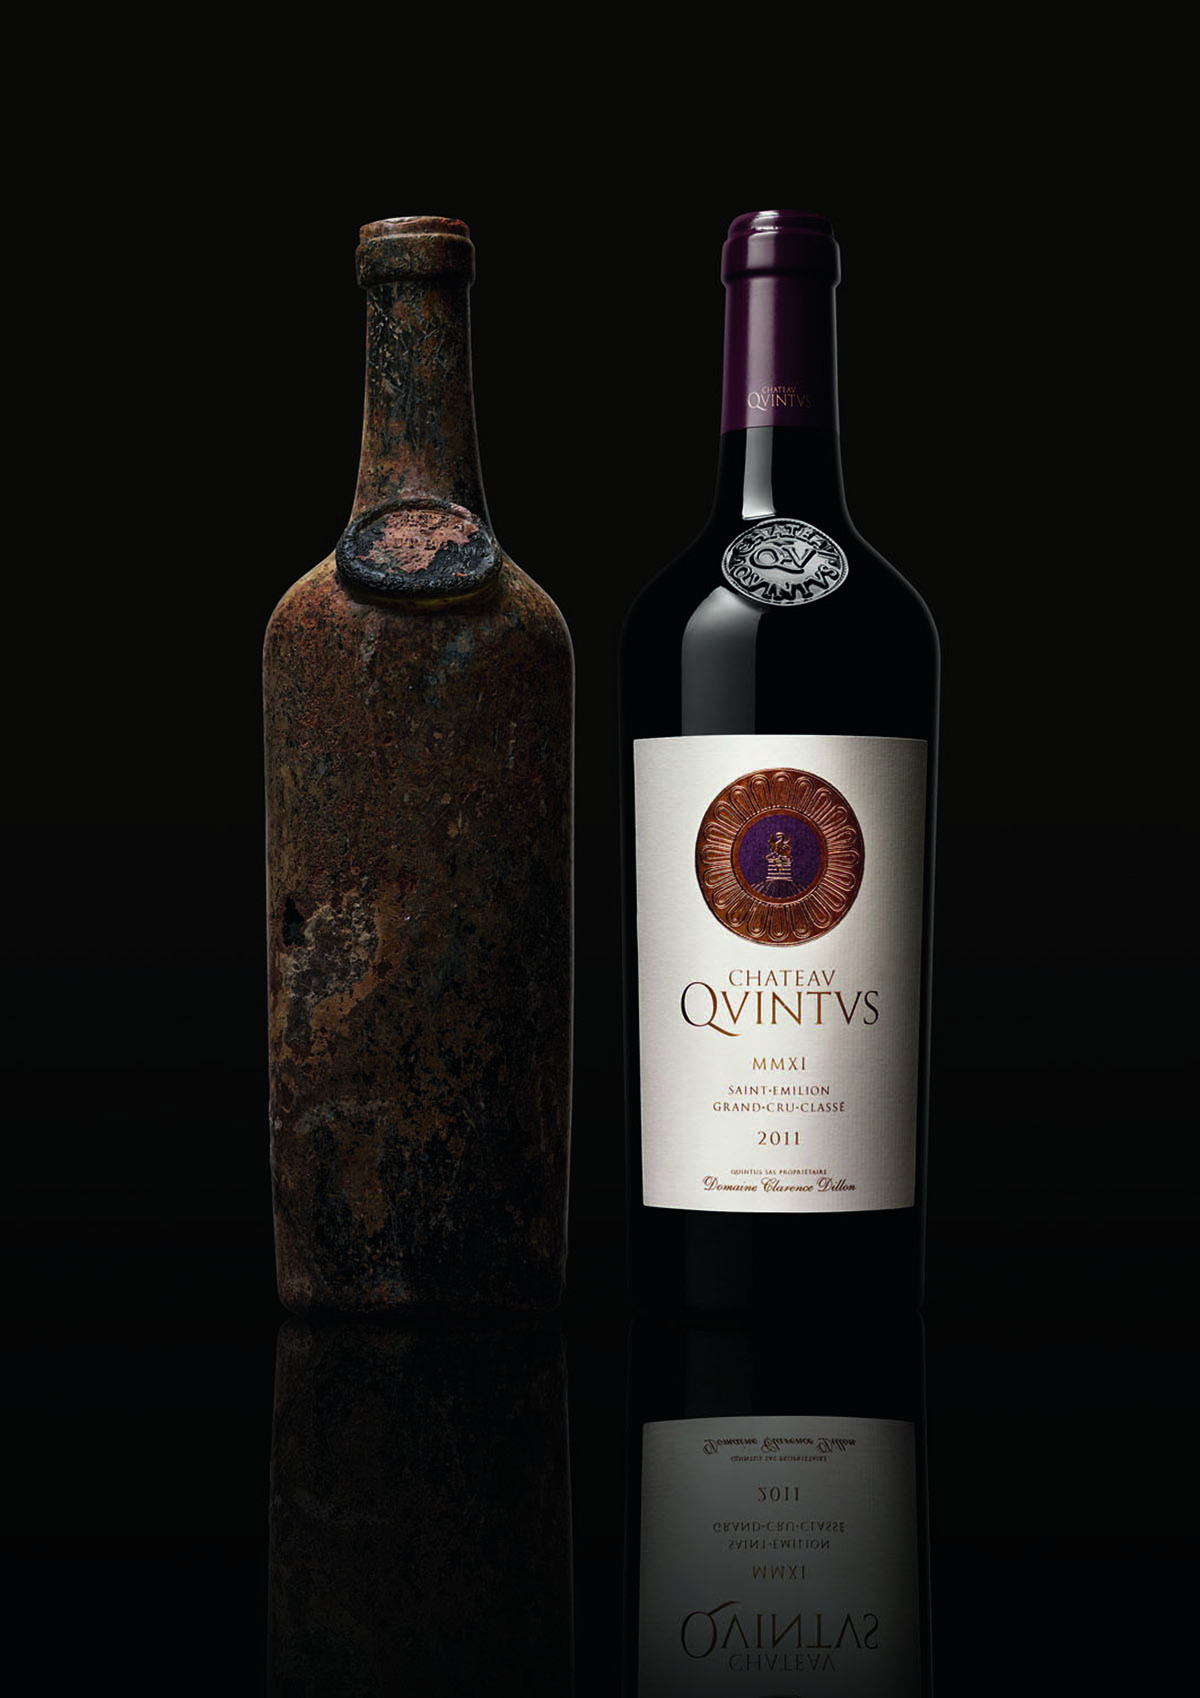 A contemporary bottle of wine and an antique bottle of wine 